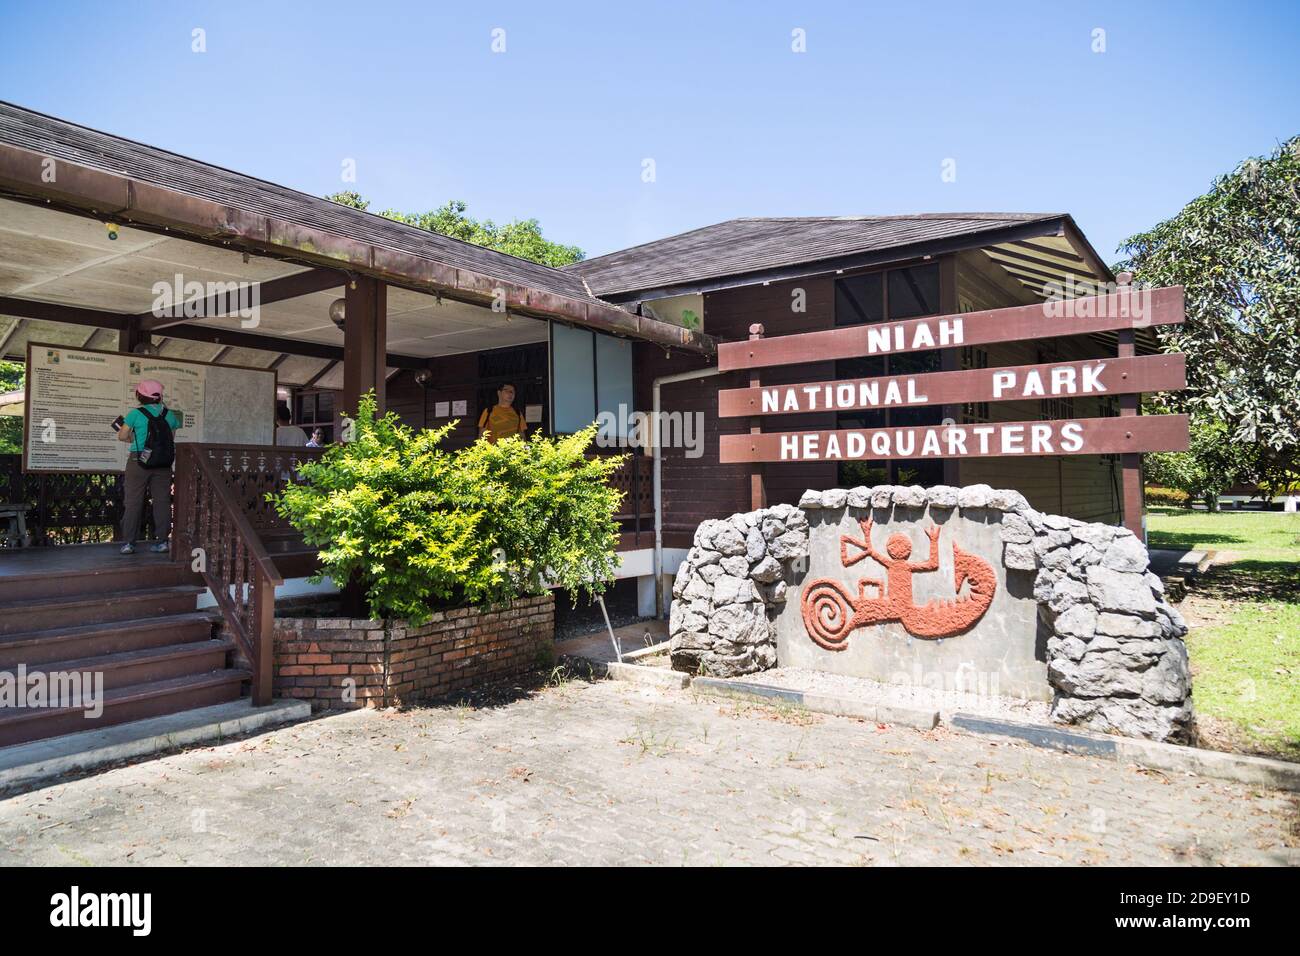 Niah National Park HQ is the administration center on admission to the Niah Great Caves in Sarawak, Malaysia Stock Photo